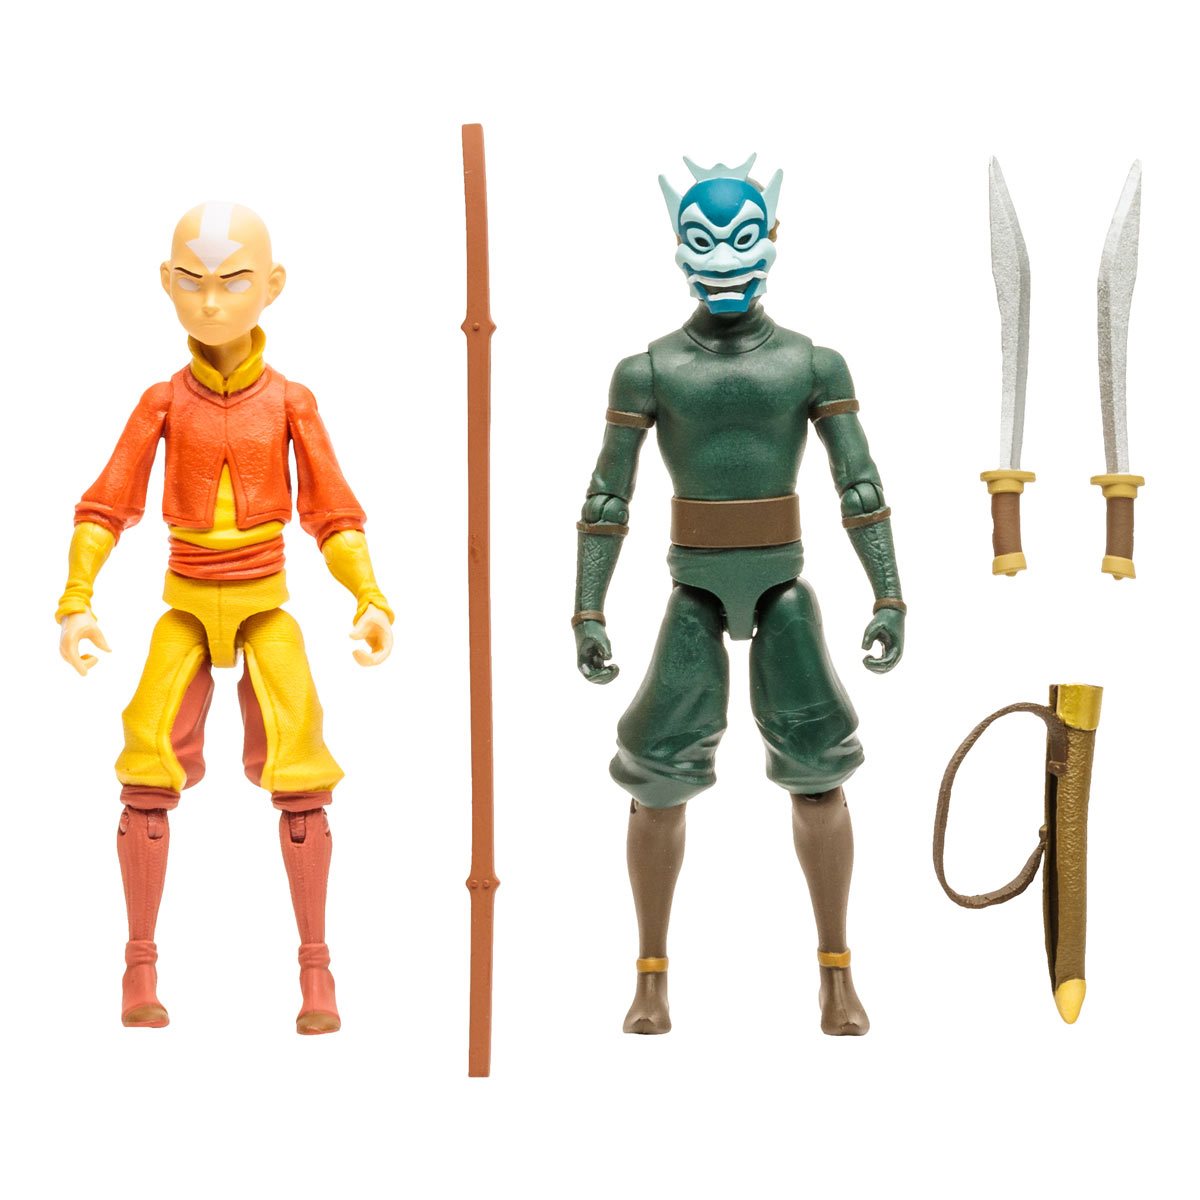 Avatar The Last Airbender Toys Decor  More